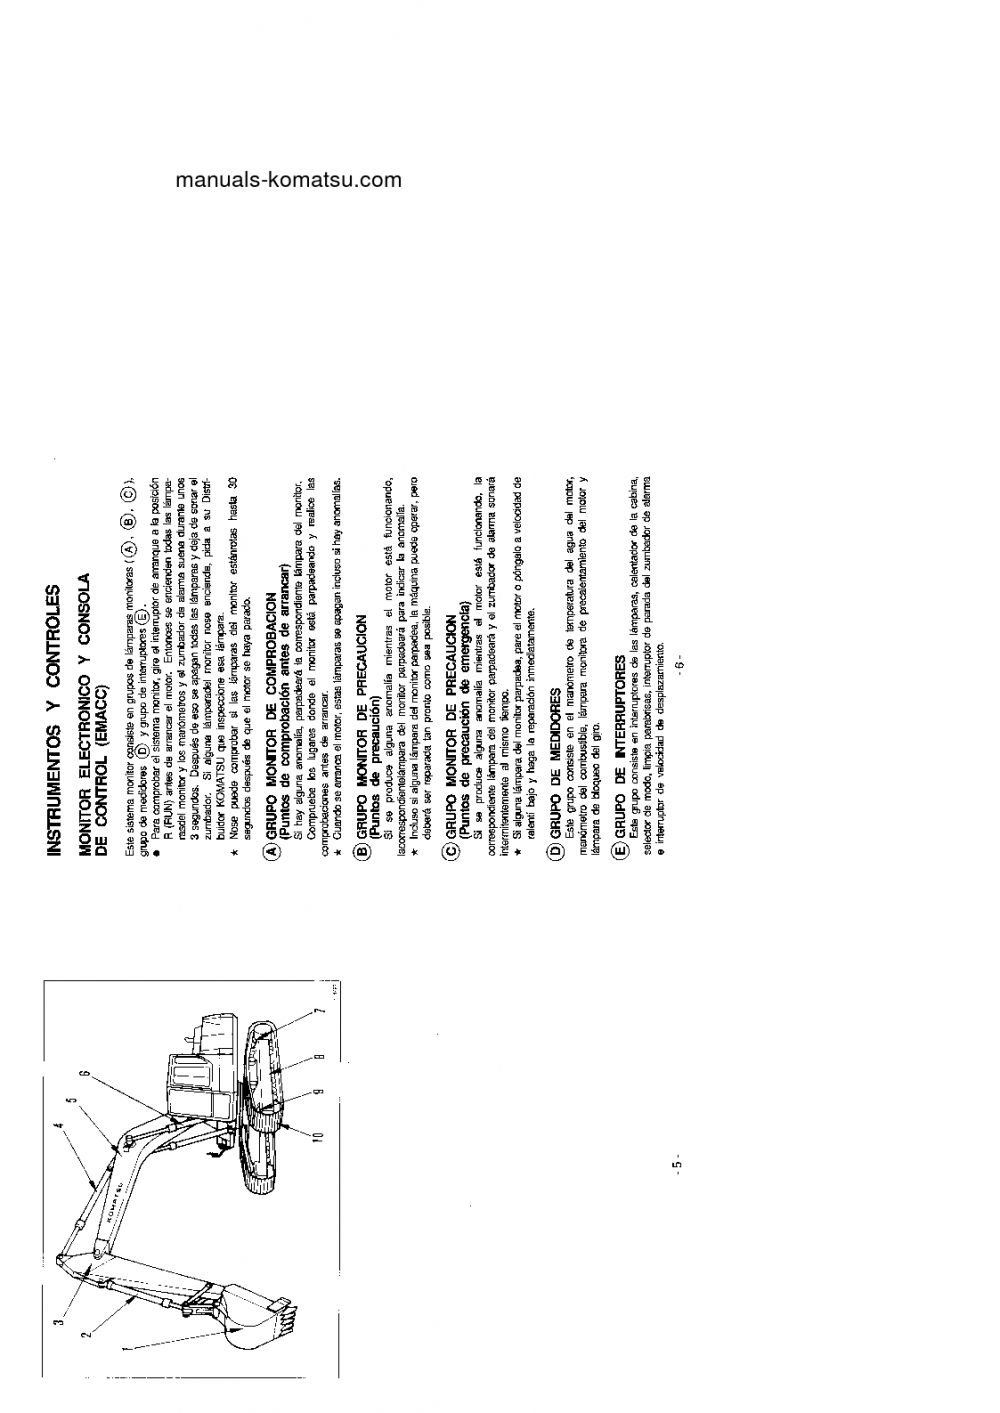 Protected: PC240NLC-5(GBR)-K S/N K20001-UP Operation manual (Spanish)